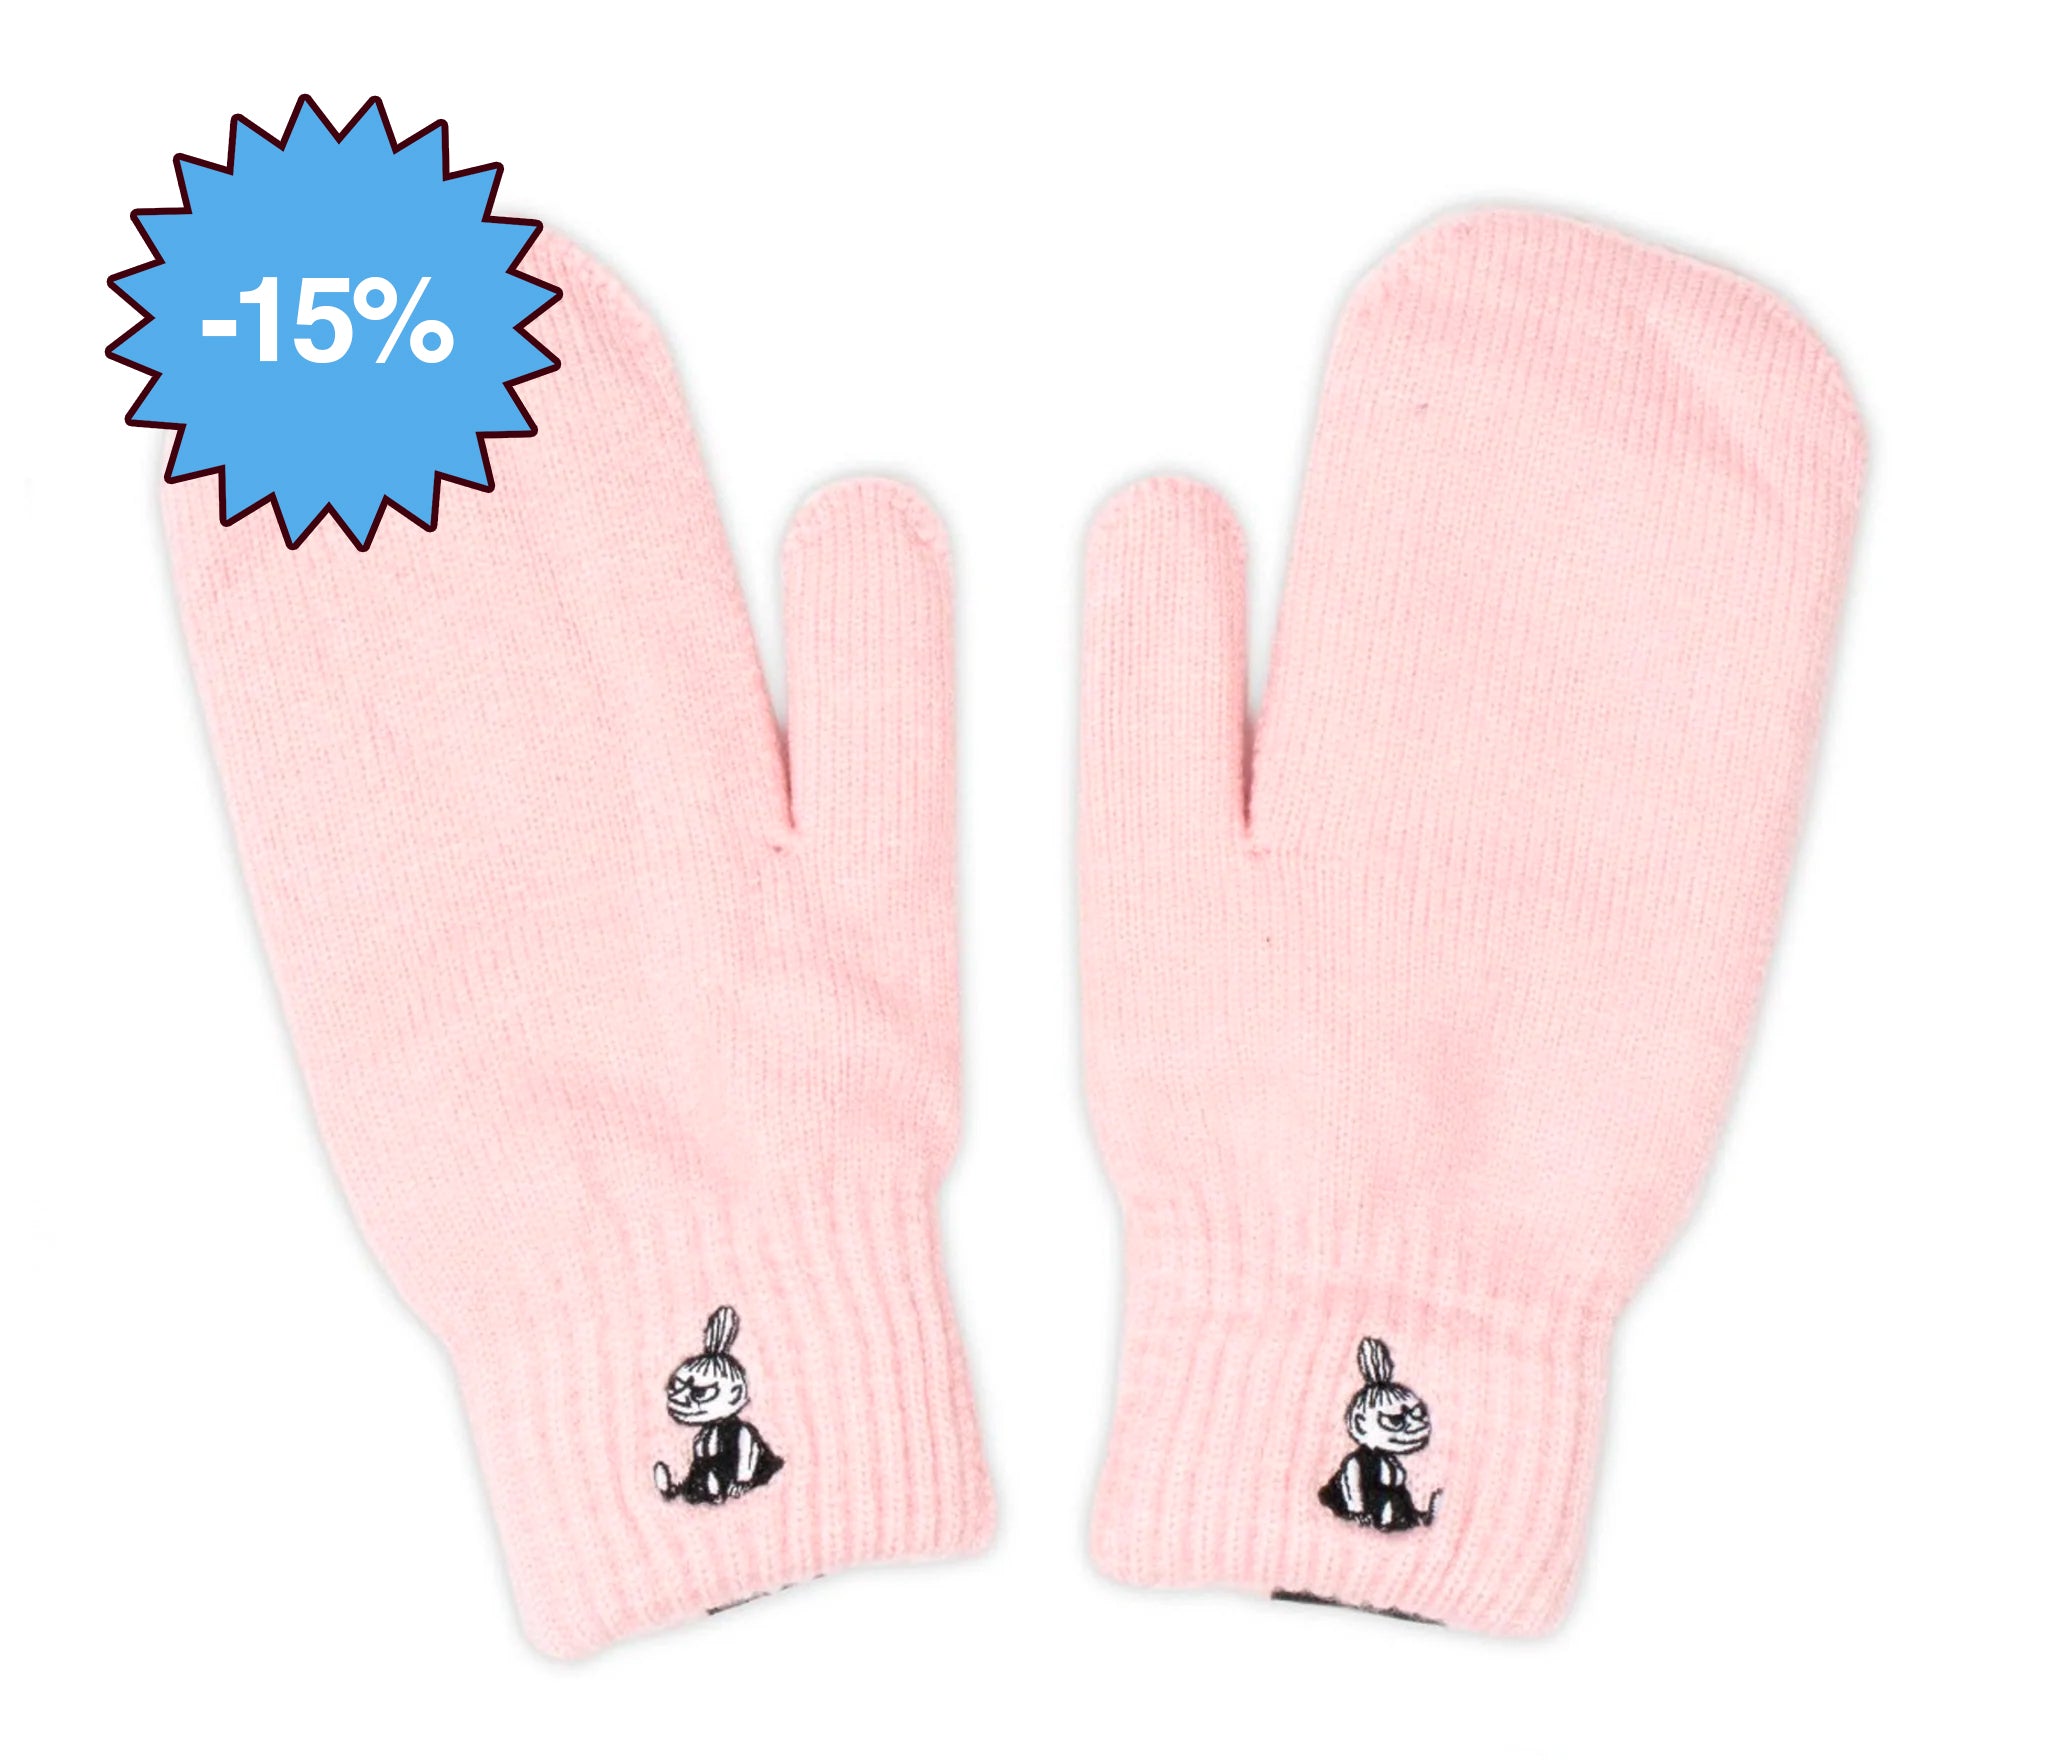 [Moomin] Little My Mittens Adult Pink